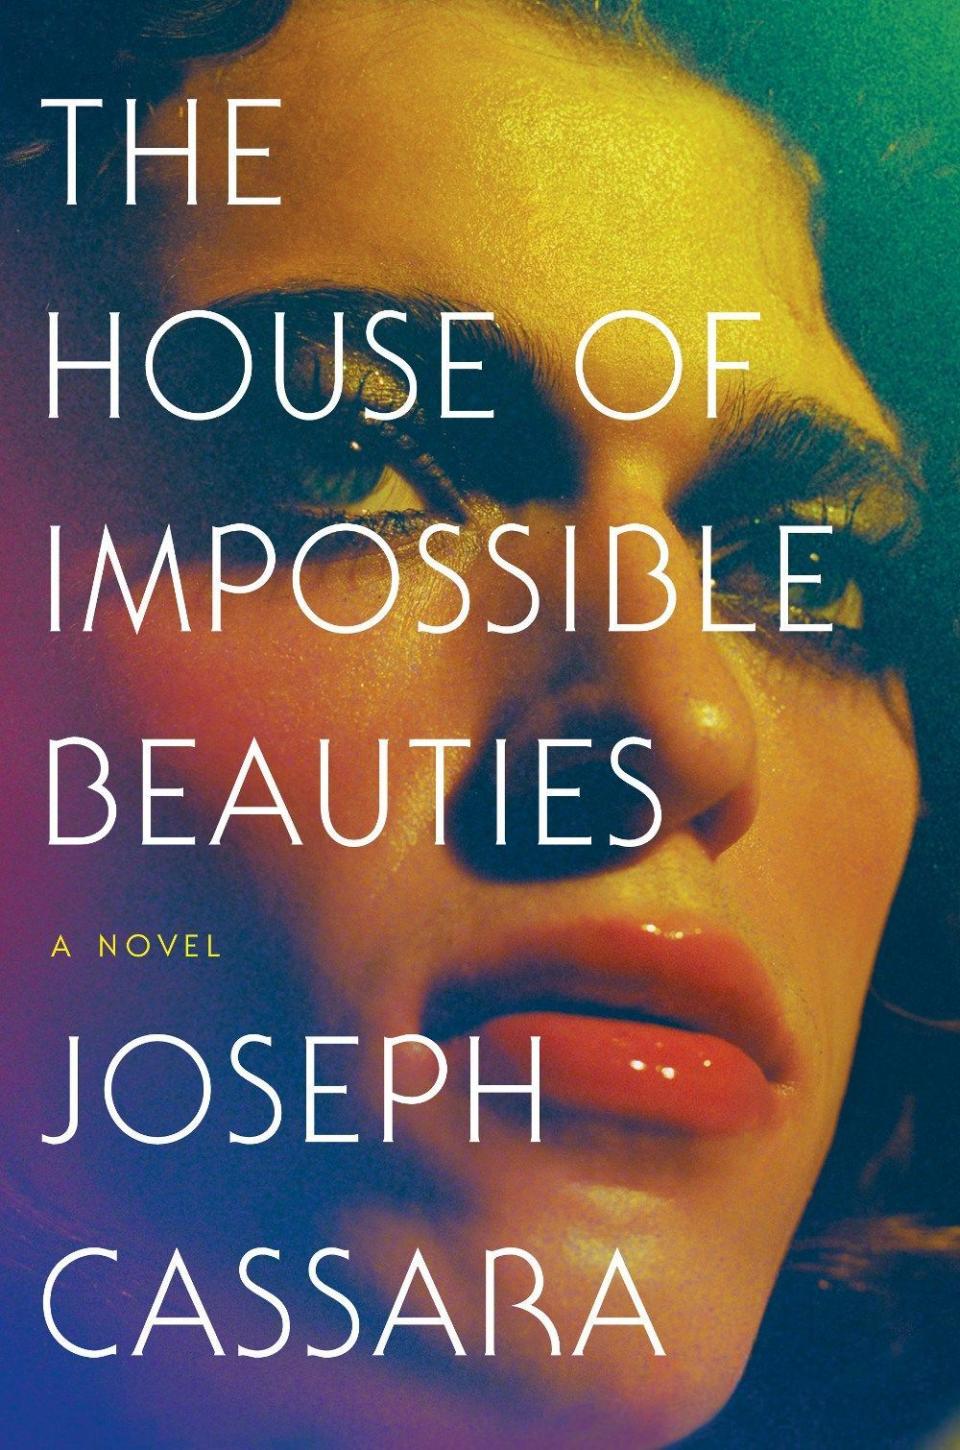 9) <i>The House of Impossible Beauties: A Novel</i> by Joseph Cassara